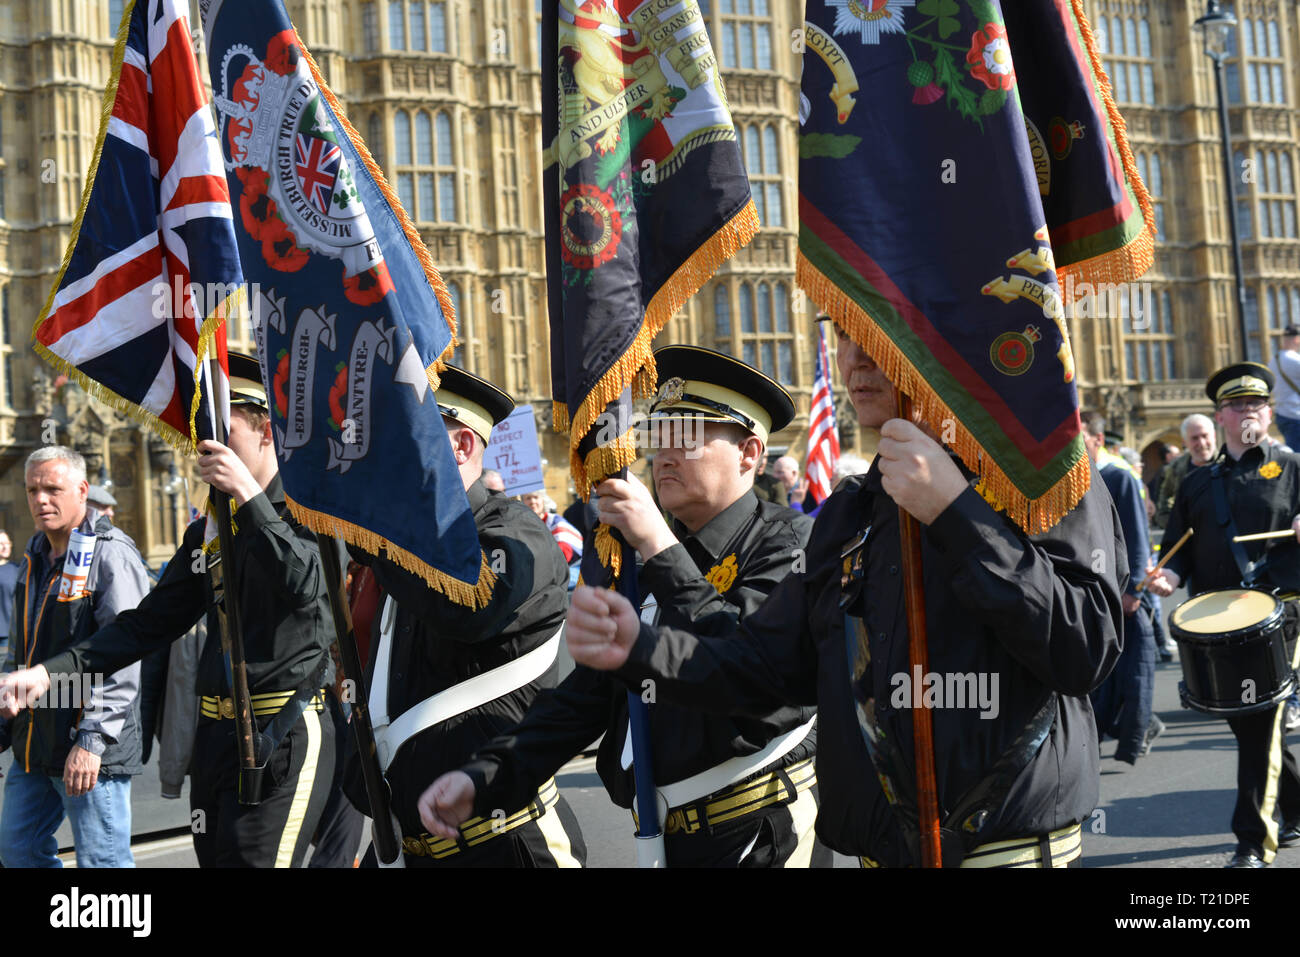 London, UK. 29th March, 2019. Pro-Brexit Activists demonstrate opposite Houses Of Parliament, on the day the UK was supposed to be leaving the EU. Credit: Thomas Krych/Alamy Live News. Stock Photo